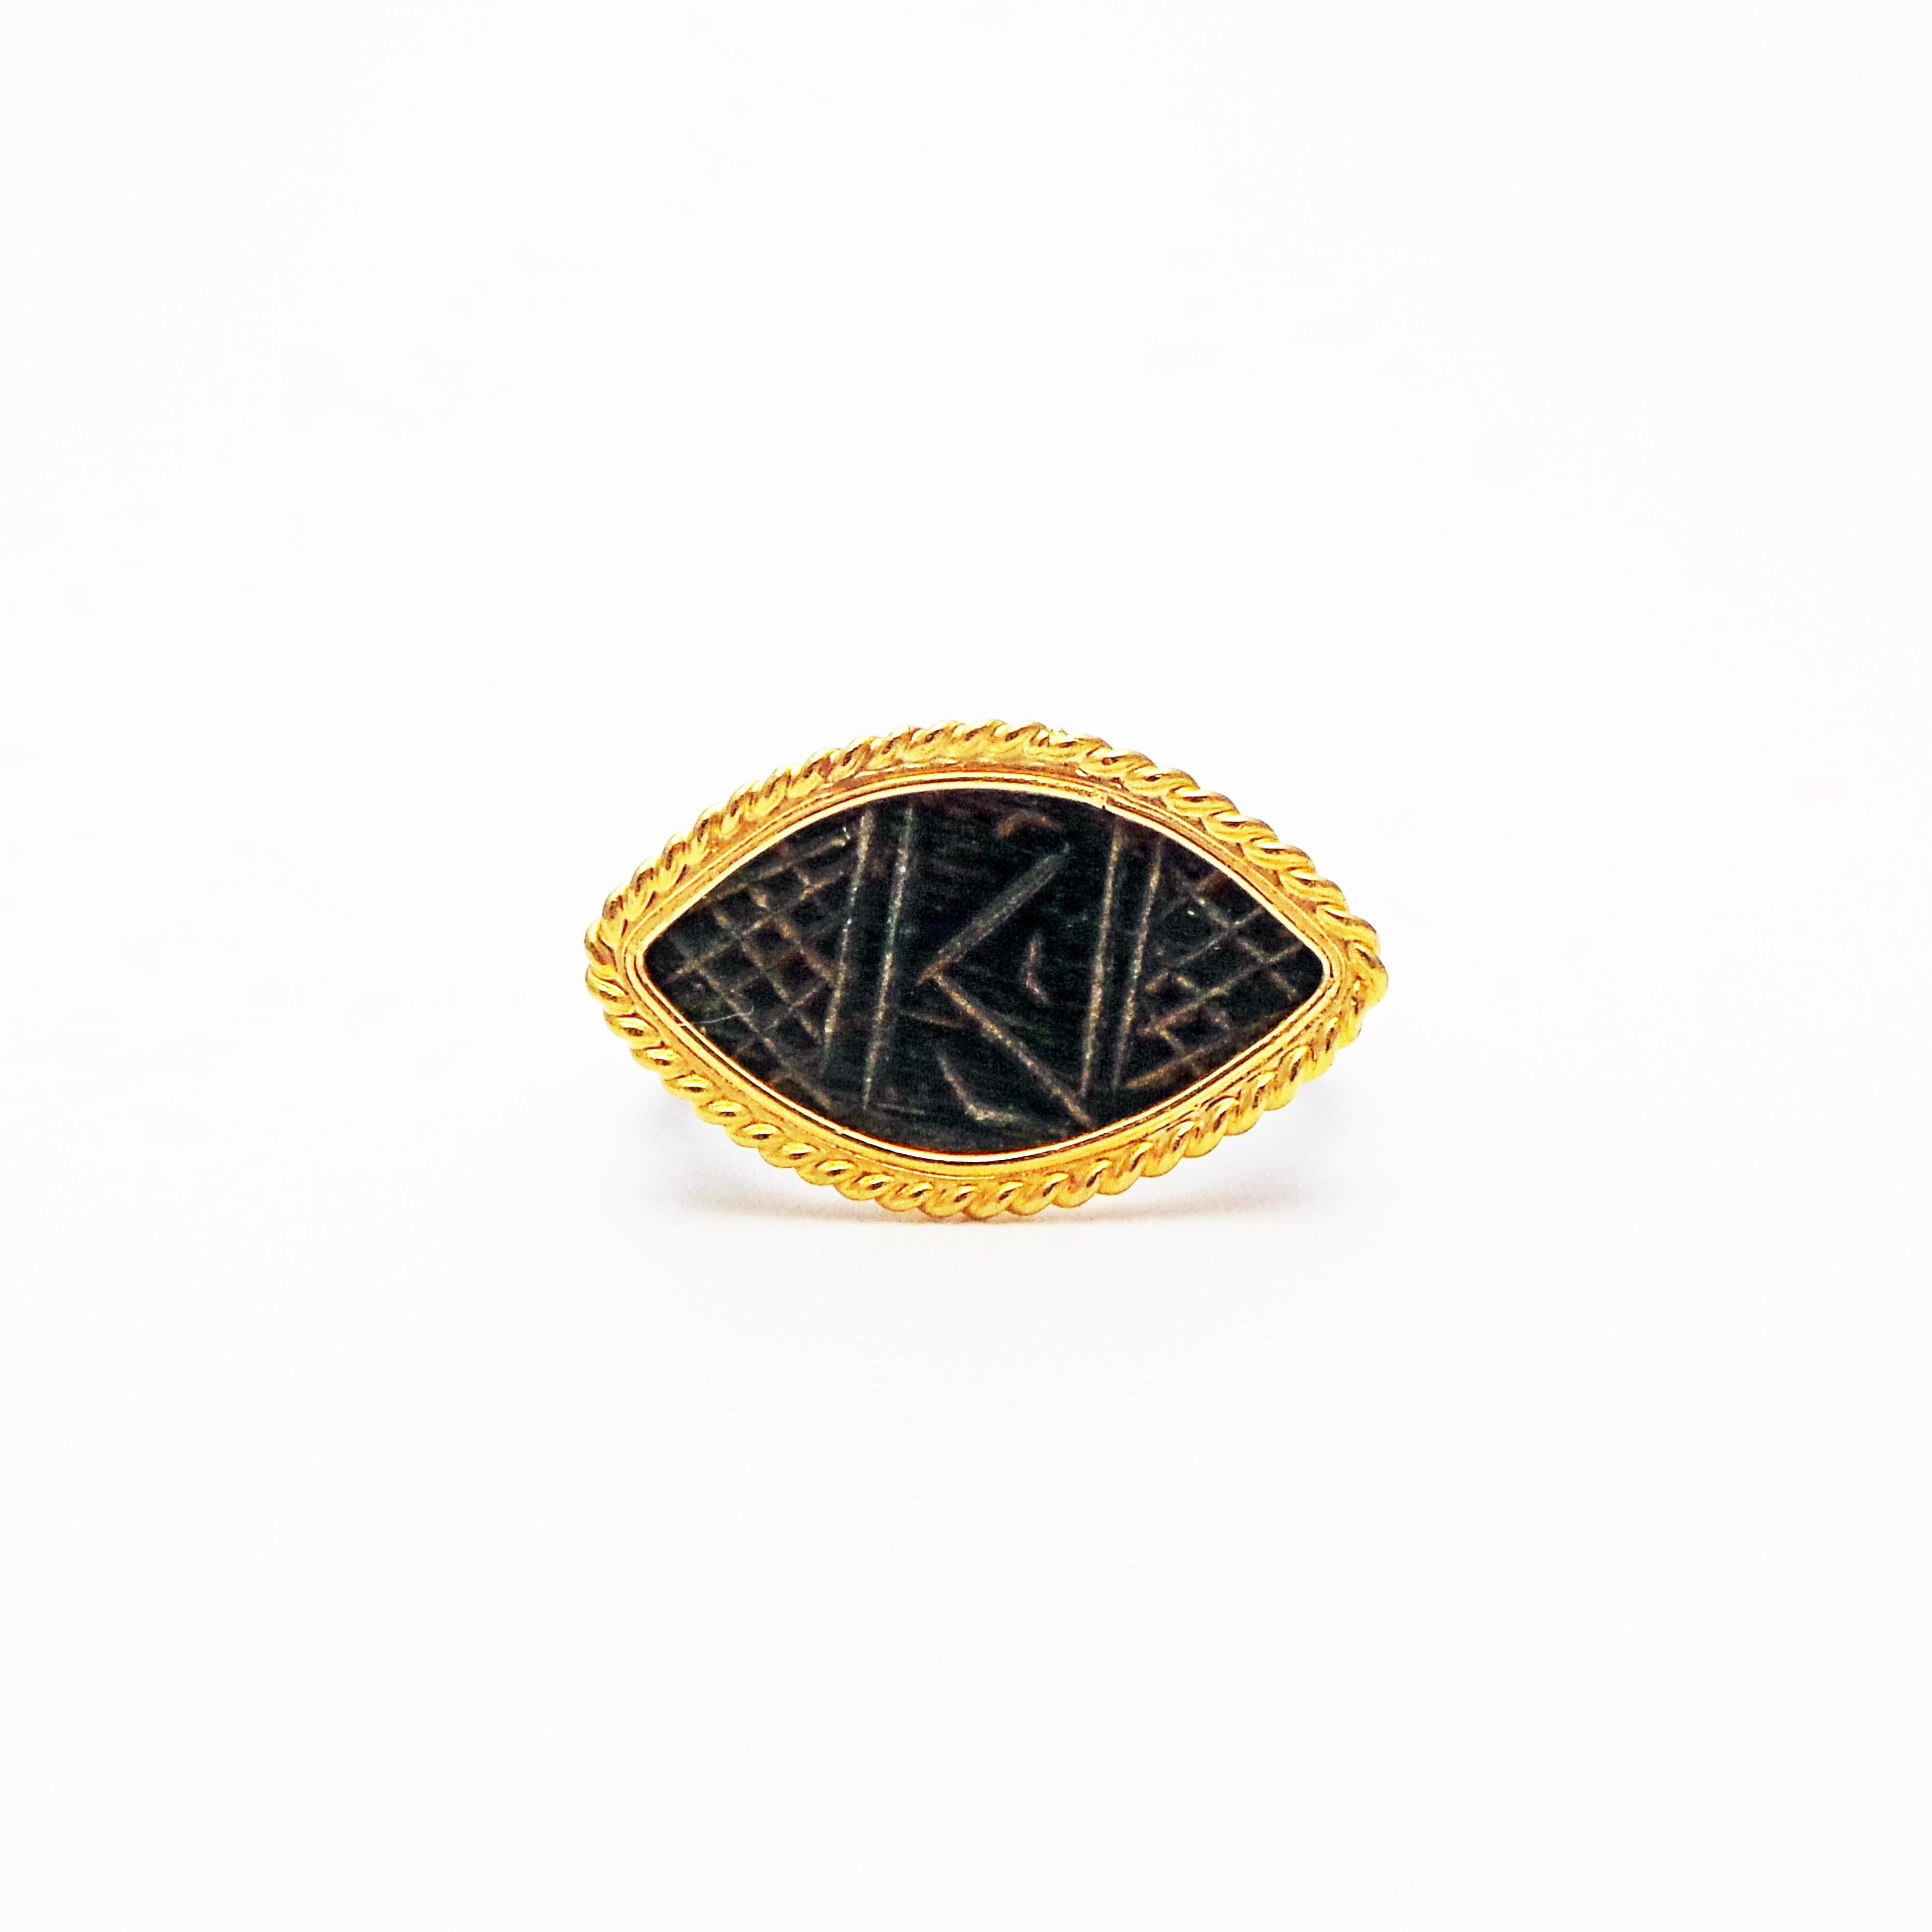 Authentic ancient Roman bronze engraved ring with contemporary added 22k gold rope detailed bezel. Size 6.  Unique marquise or 